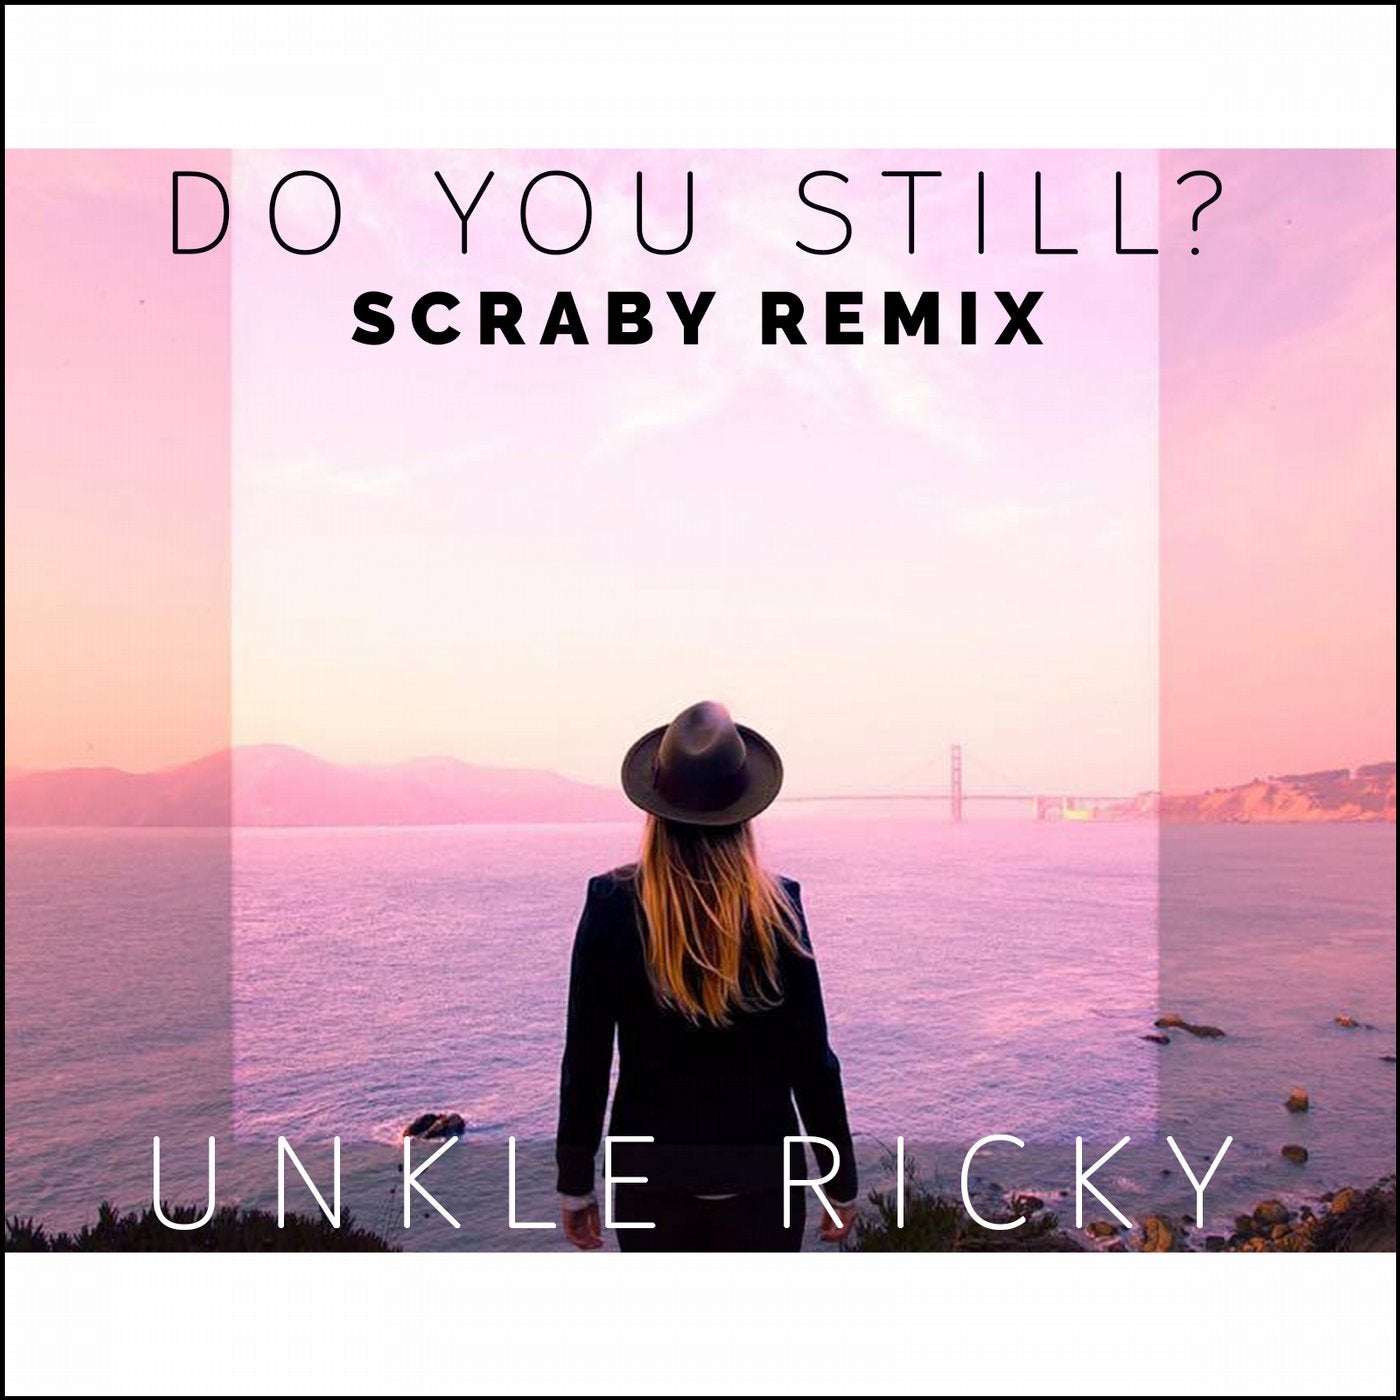 Do You Still? (Scraby Remix) feat. Mickey Shiloh